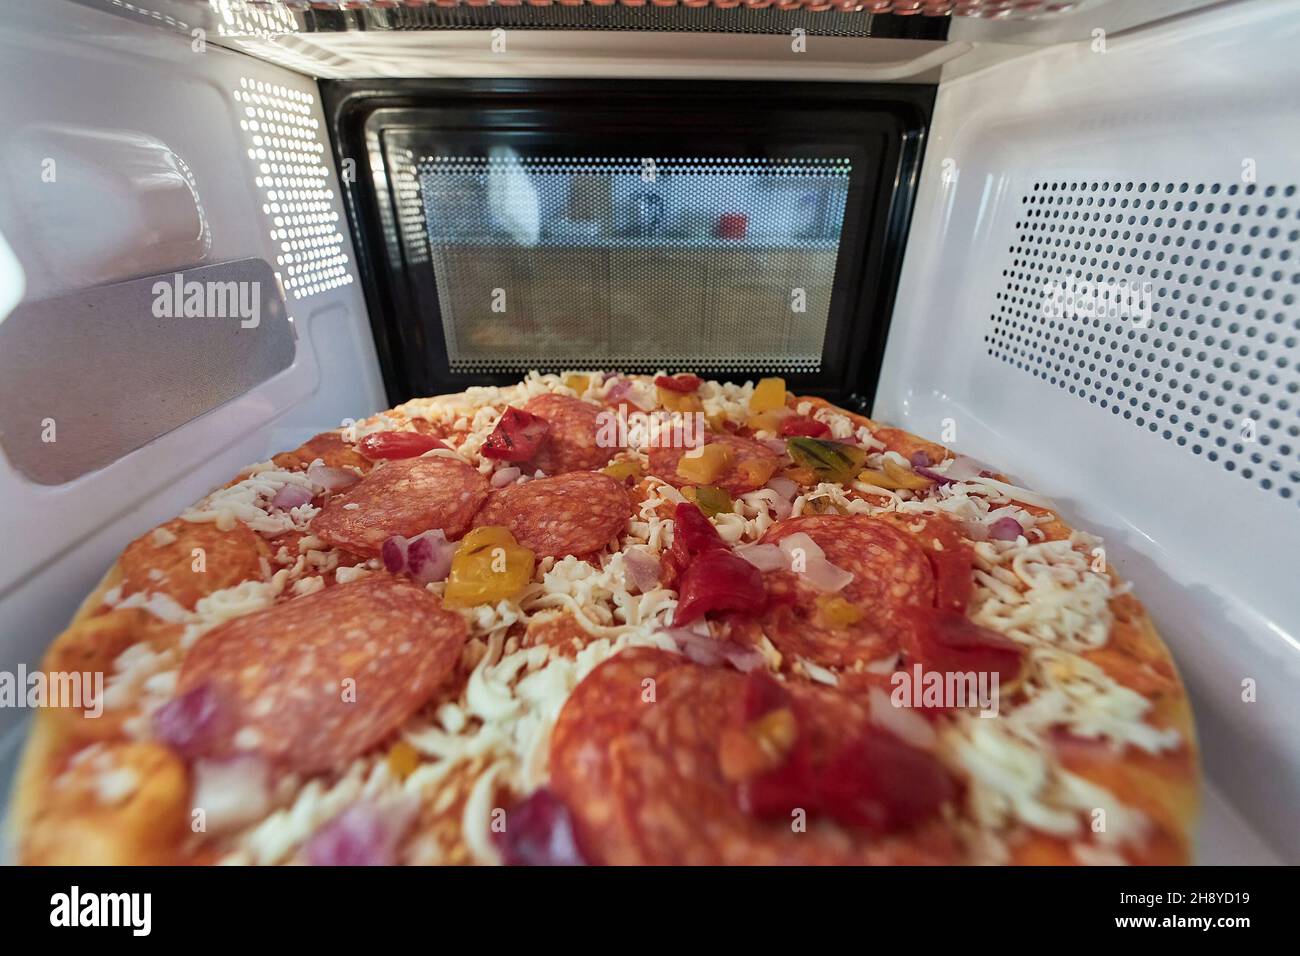 Heating pizza in a microwave oven Stock Photo